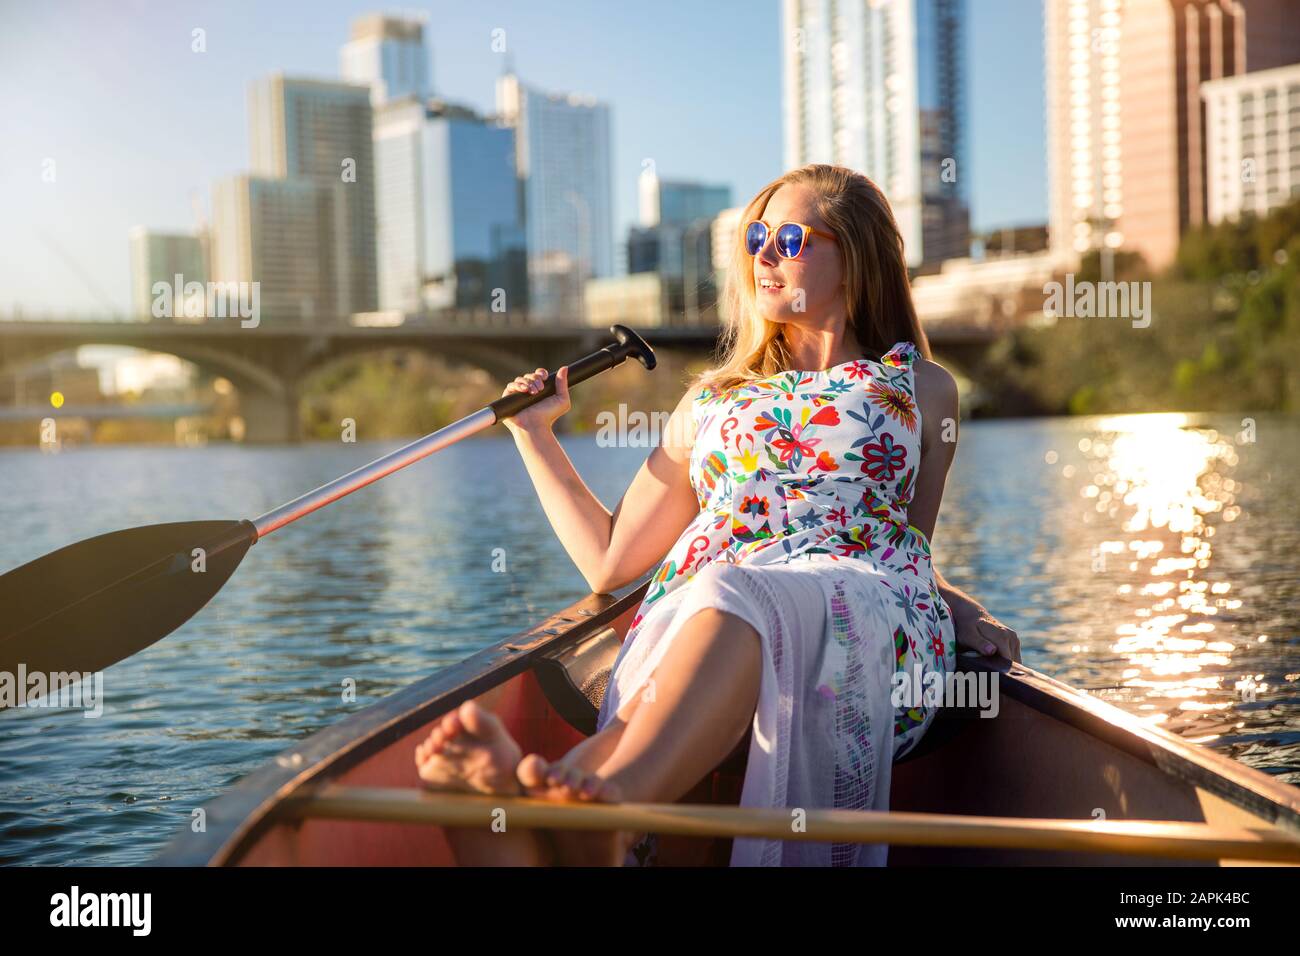 Fun lifestyle summer day in a boat on water next to city urban skyline cityscape, relaxation, travel and tourism Stock Photo